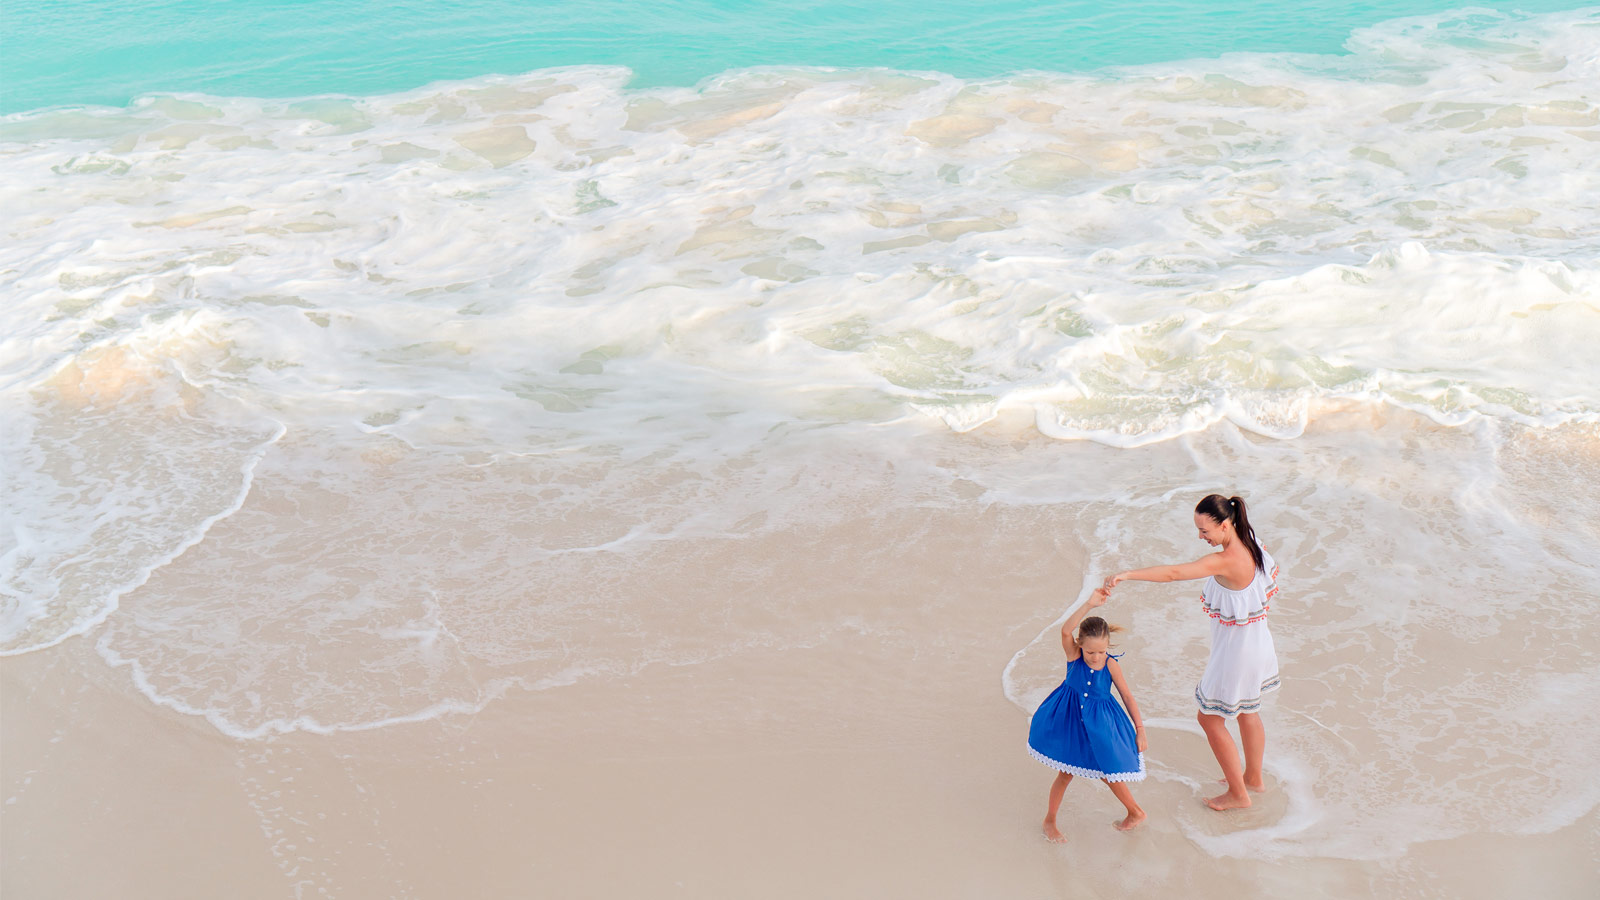 Mother and daughter dancing on the beach in the Caribbean